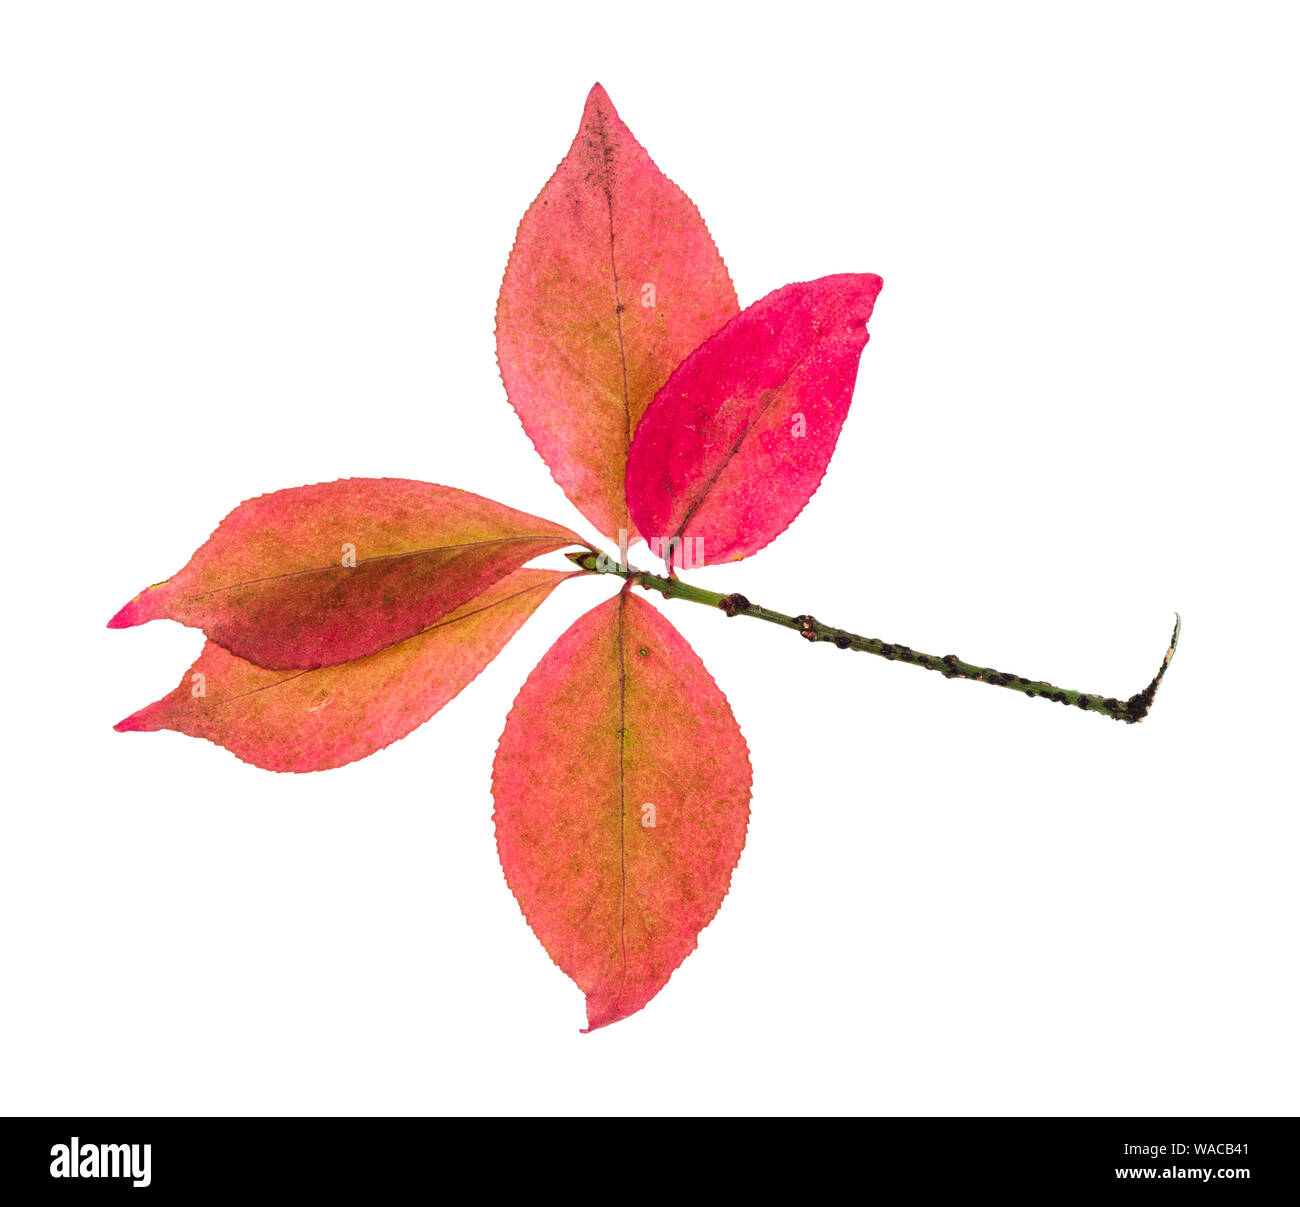 twig with pink leaves of Euonymus shrub in autumn cutout on white background Stock Photo